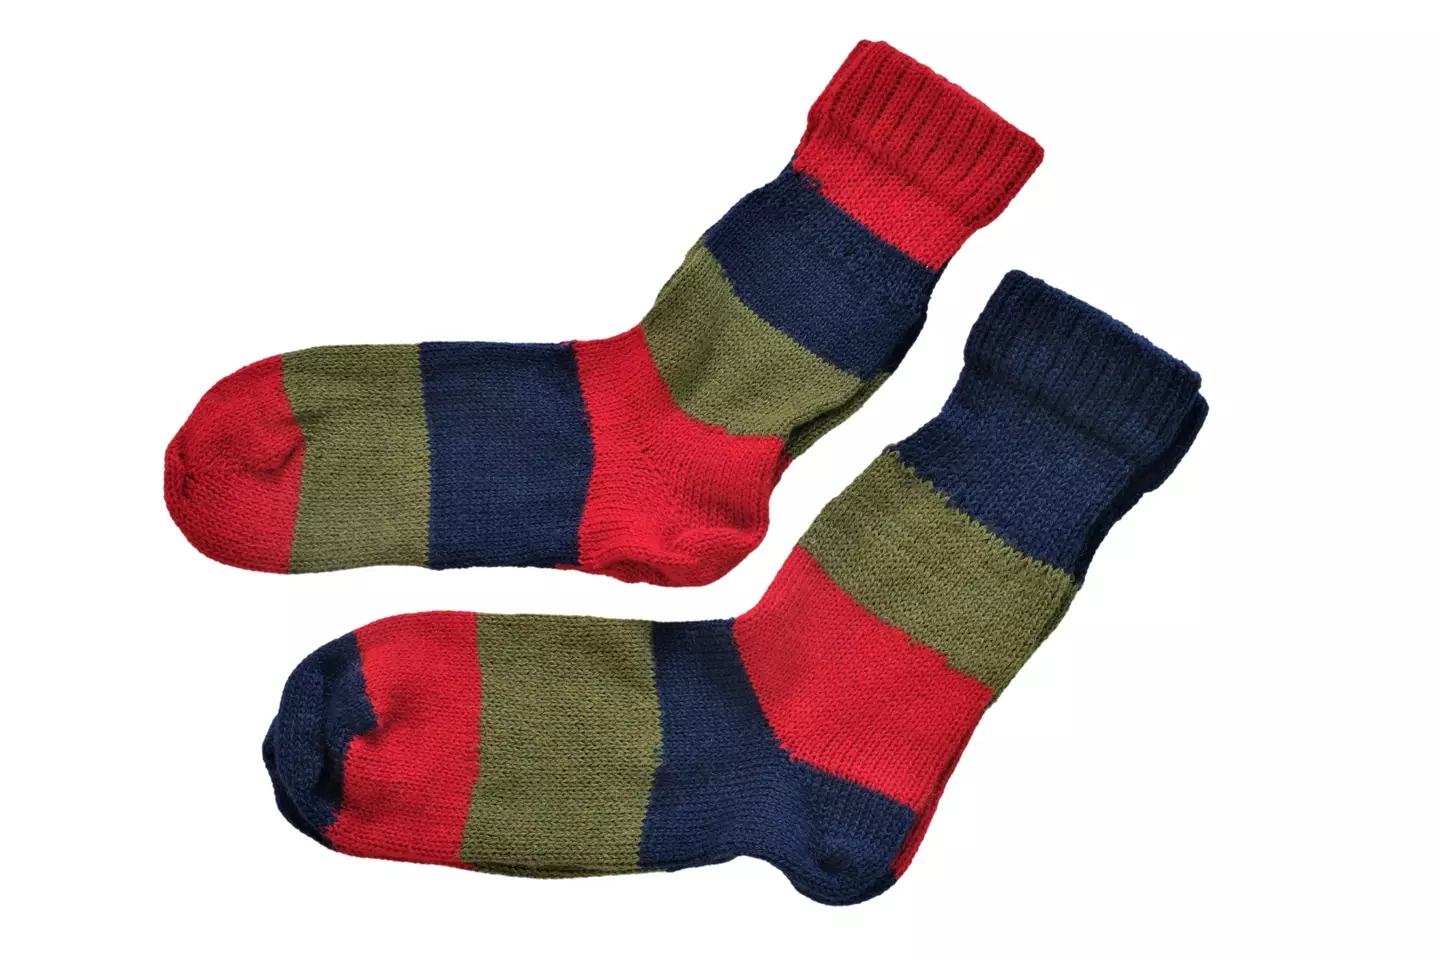 One woman recommended an old pair of socks (